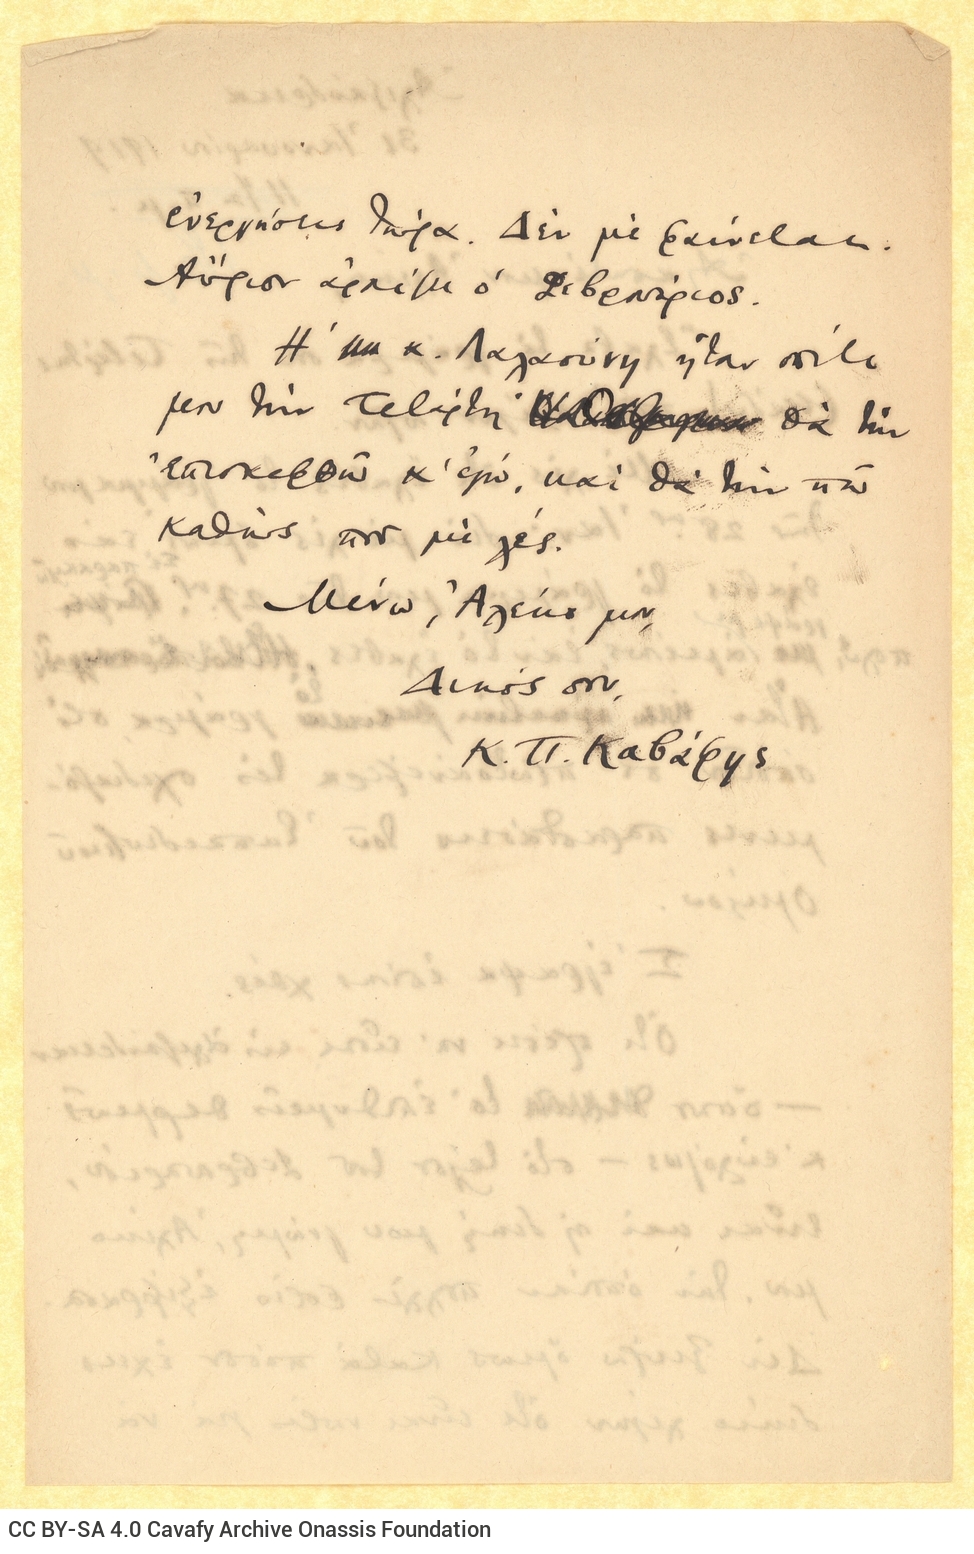 Signed handwritten copy of a letter by Cavafy to Alekos [Singopoulo] on both sides of a sheet. The poet refers to their corre